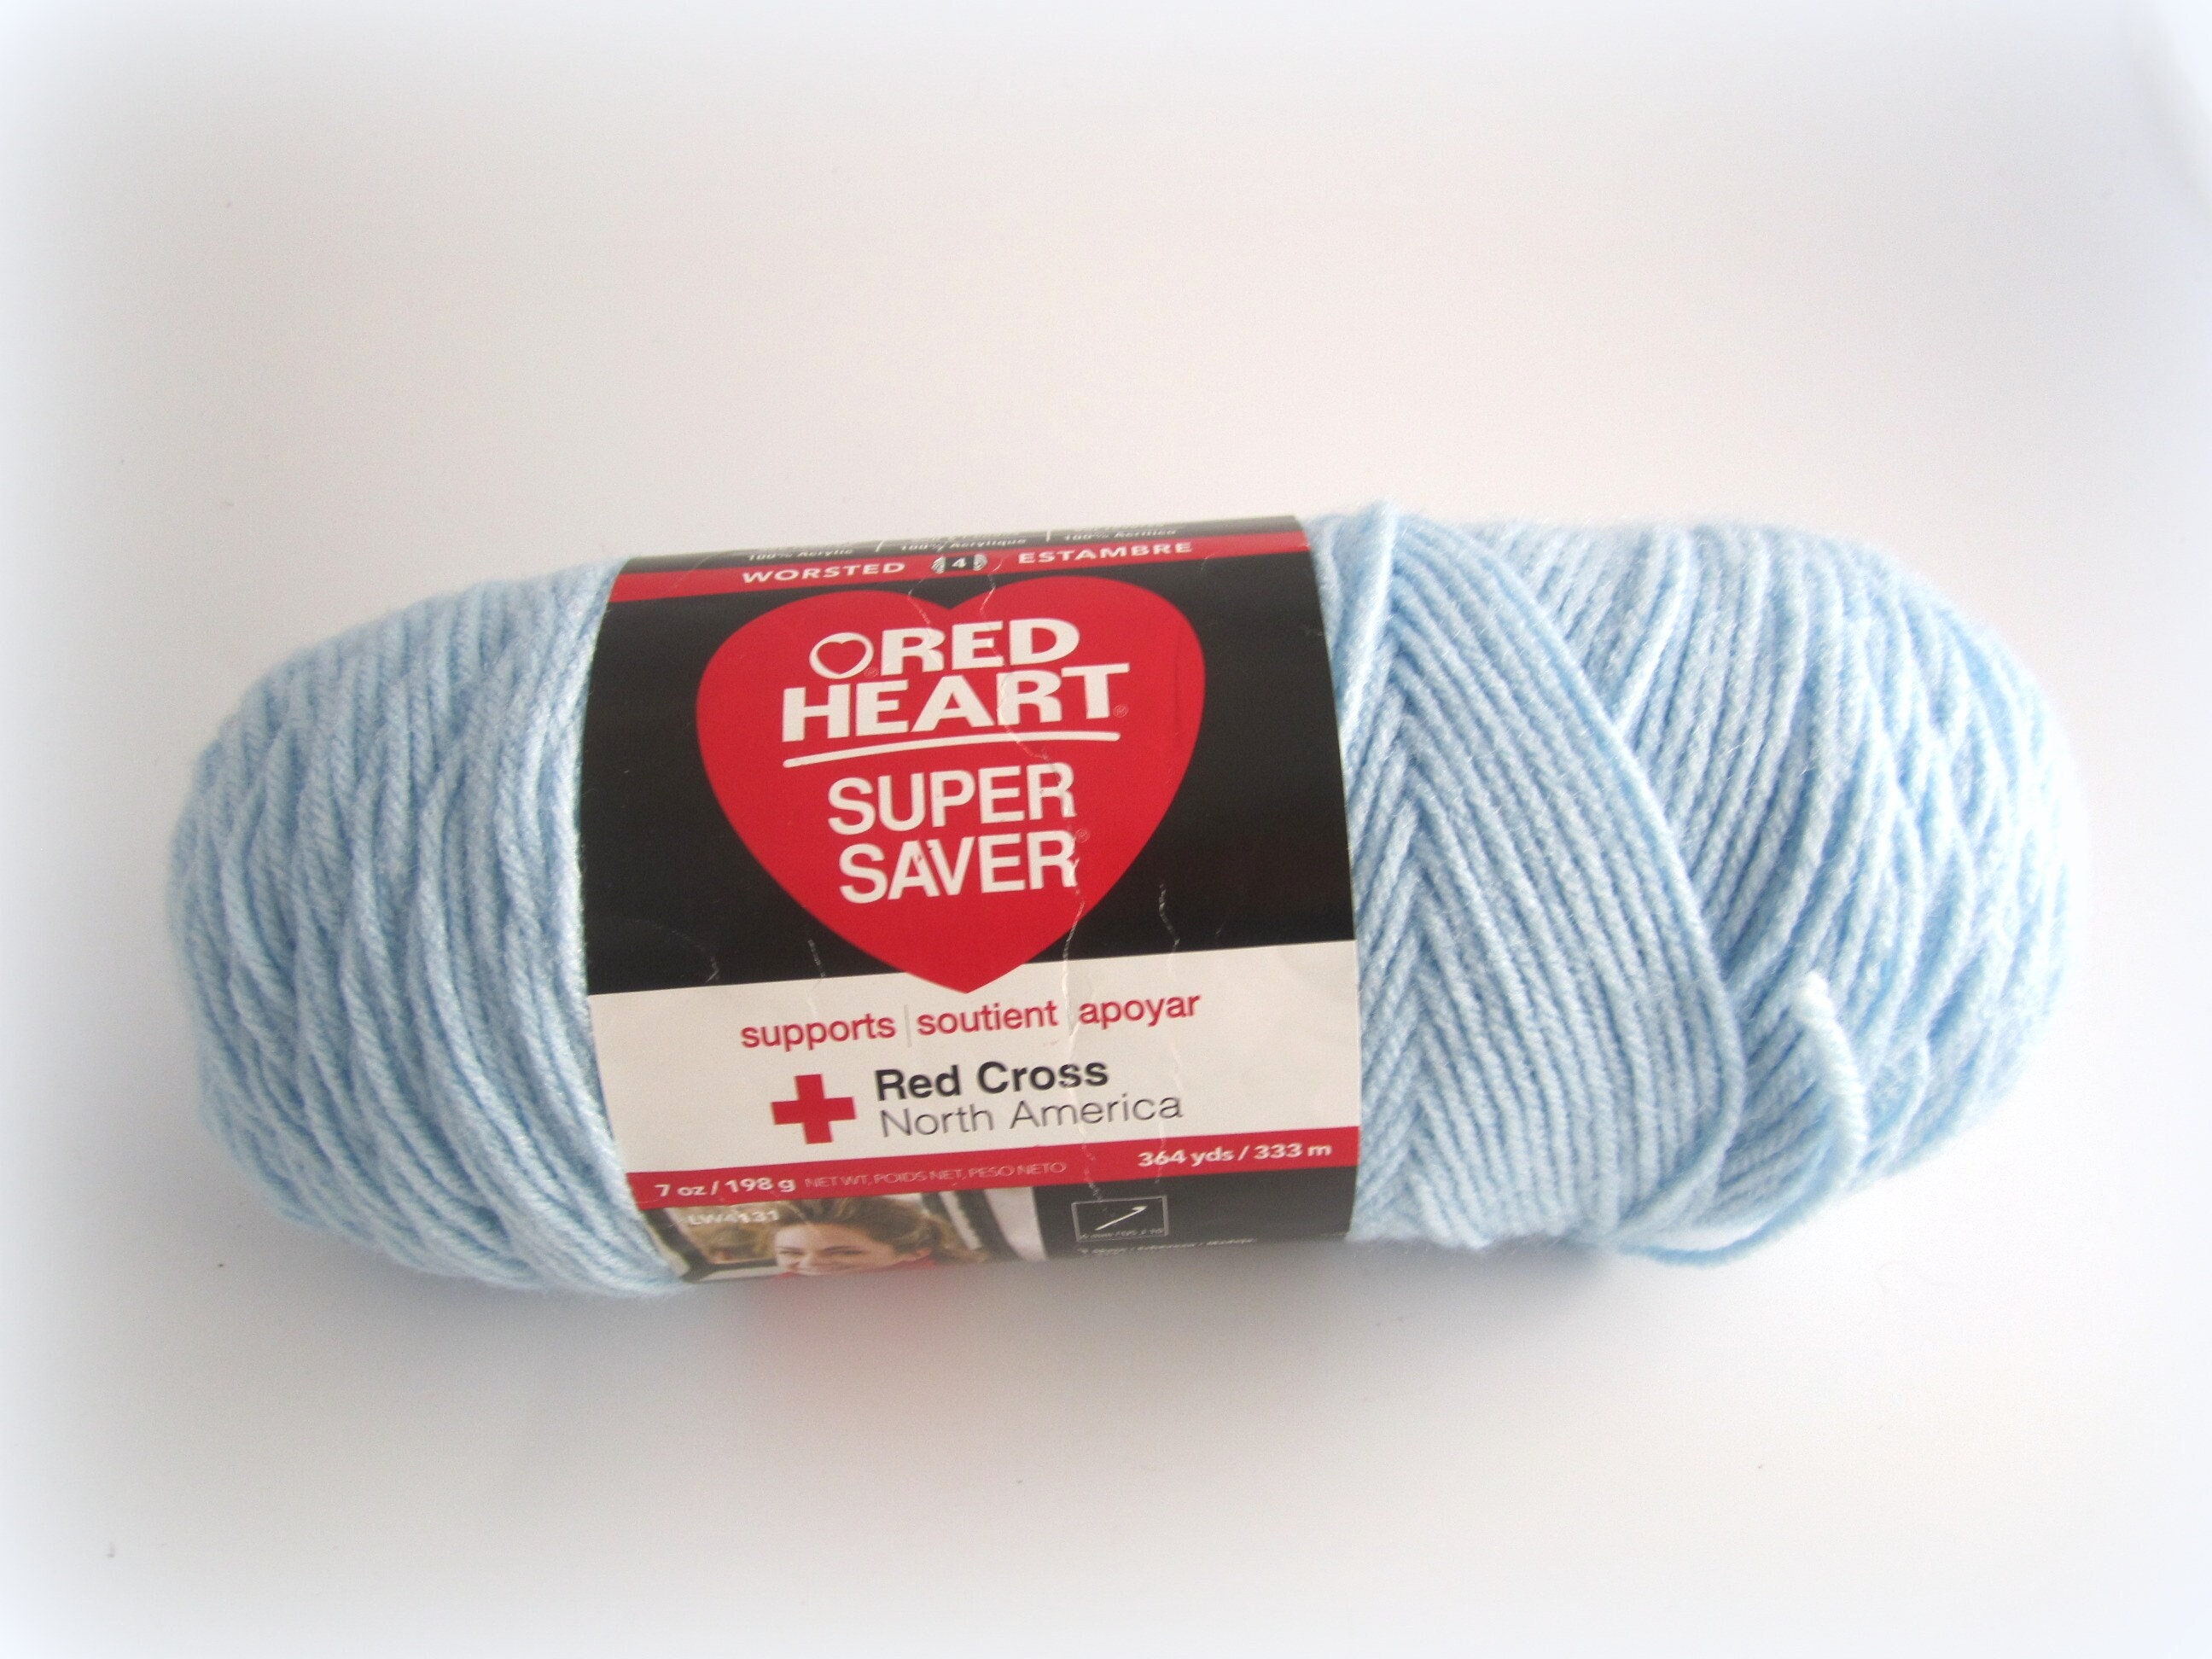 Bluetiful Ombre, Red Heart Super Saver Ombre Yarn, Variegated